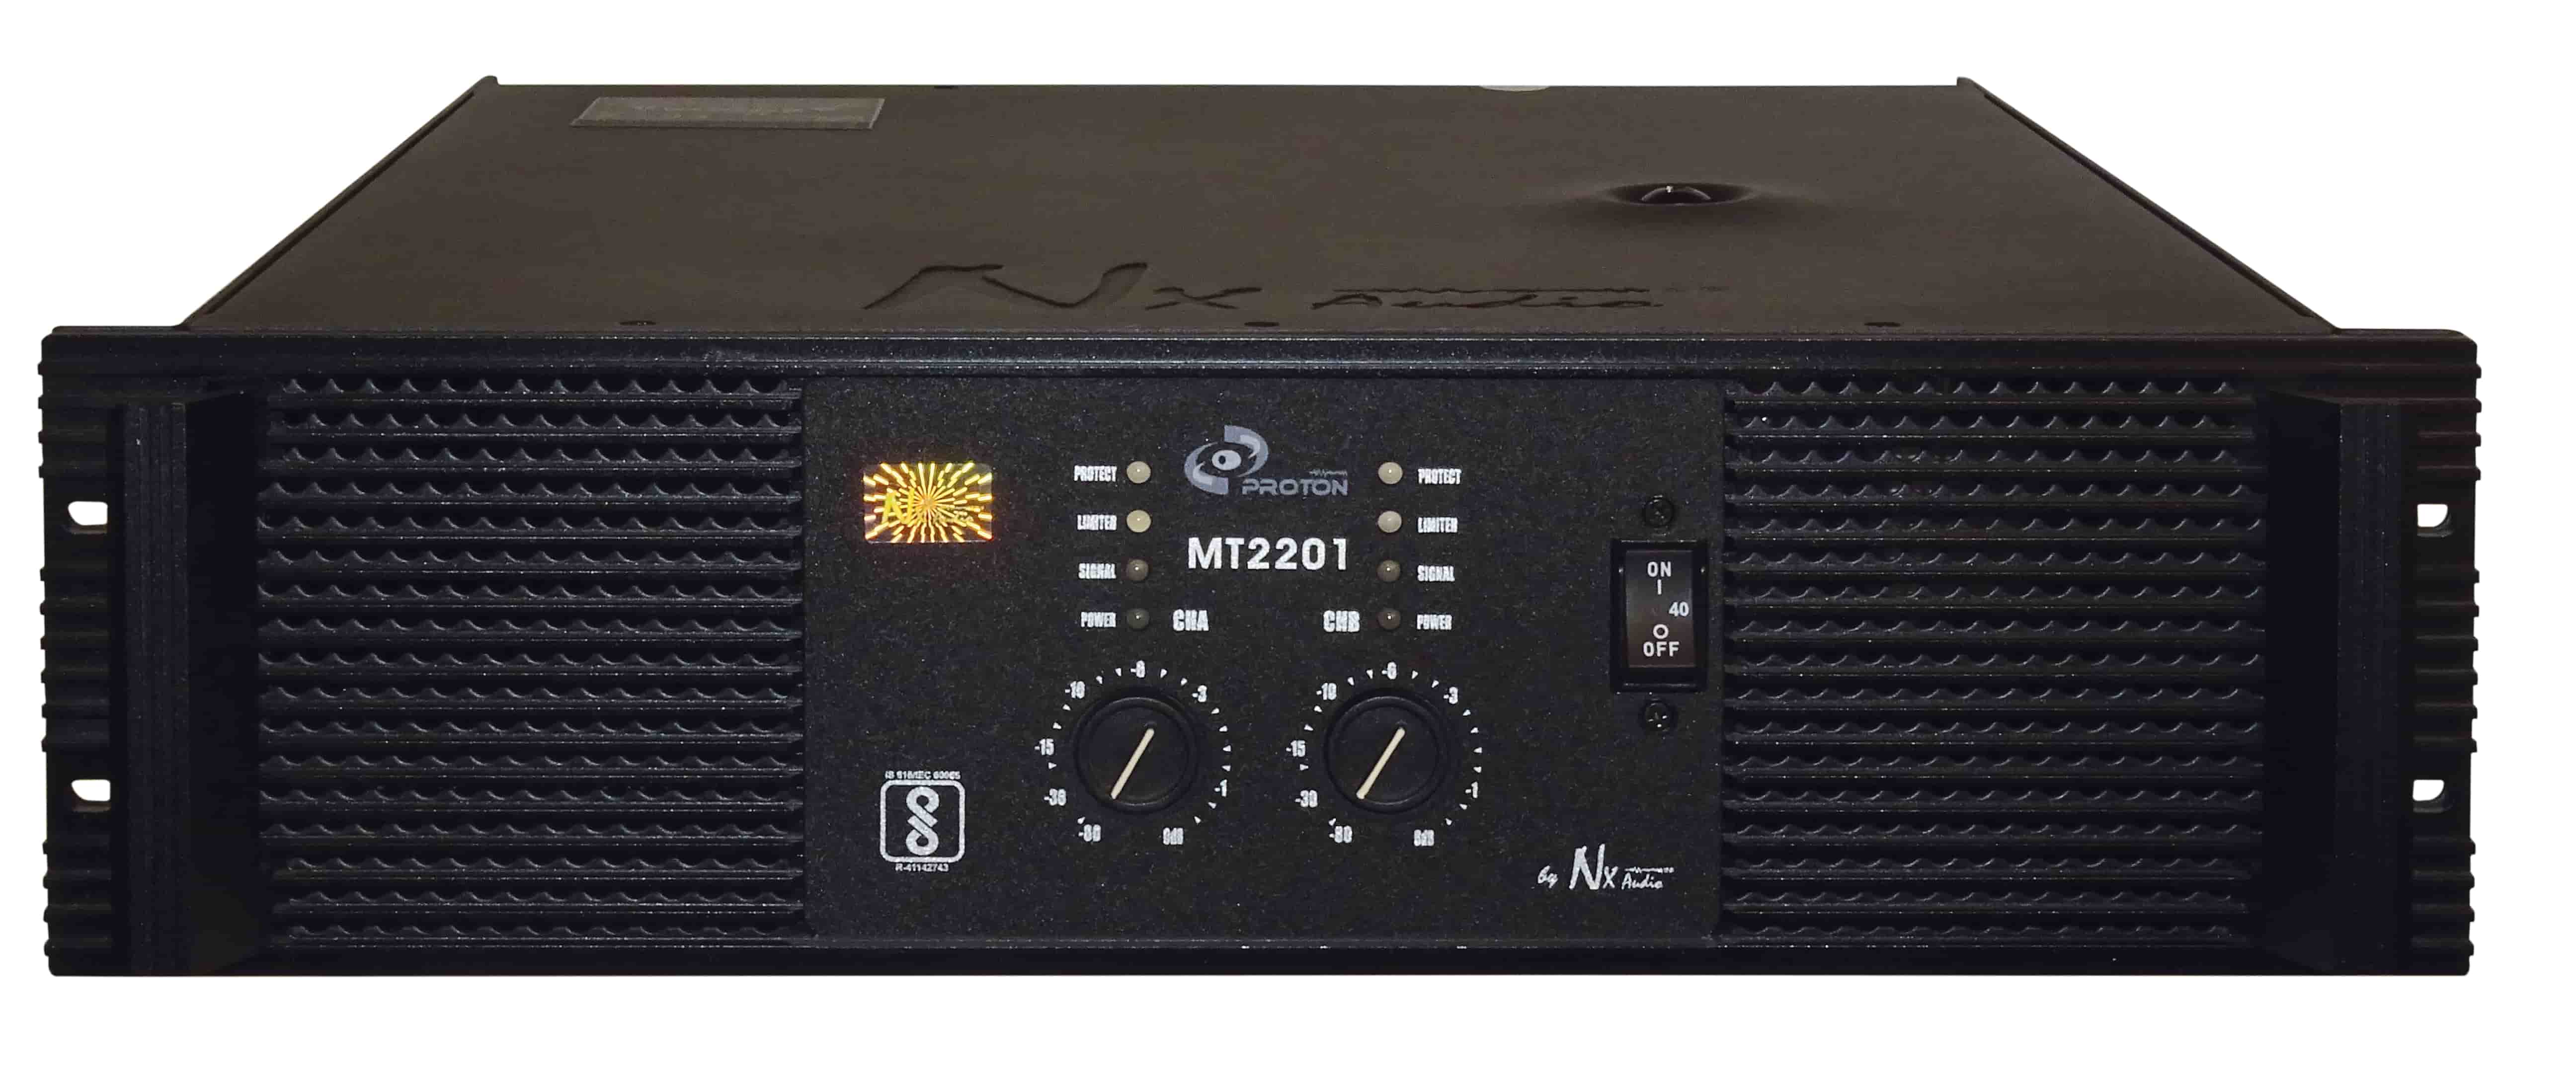 The MT2201Amplifier provides RF/EMI rejection with an LF filter